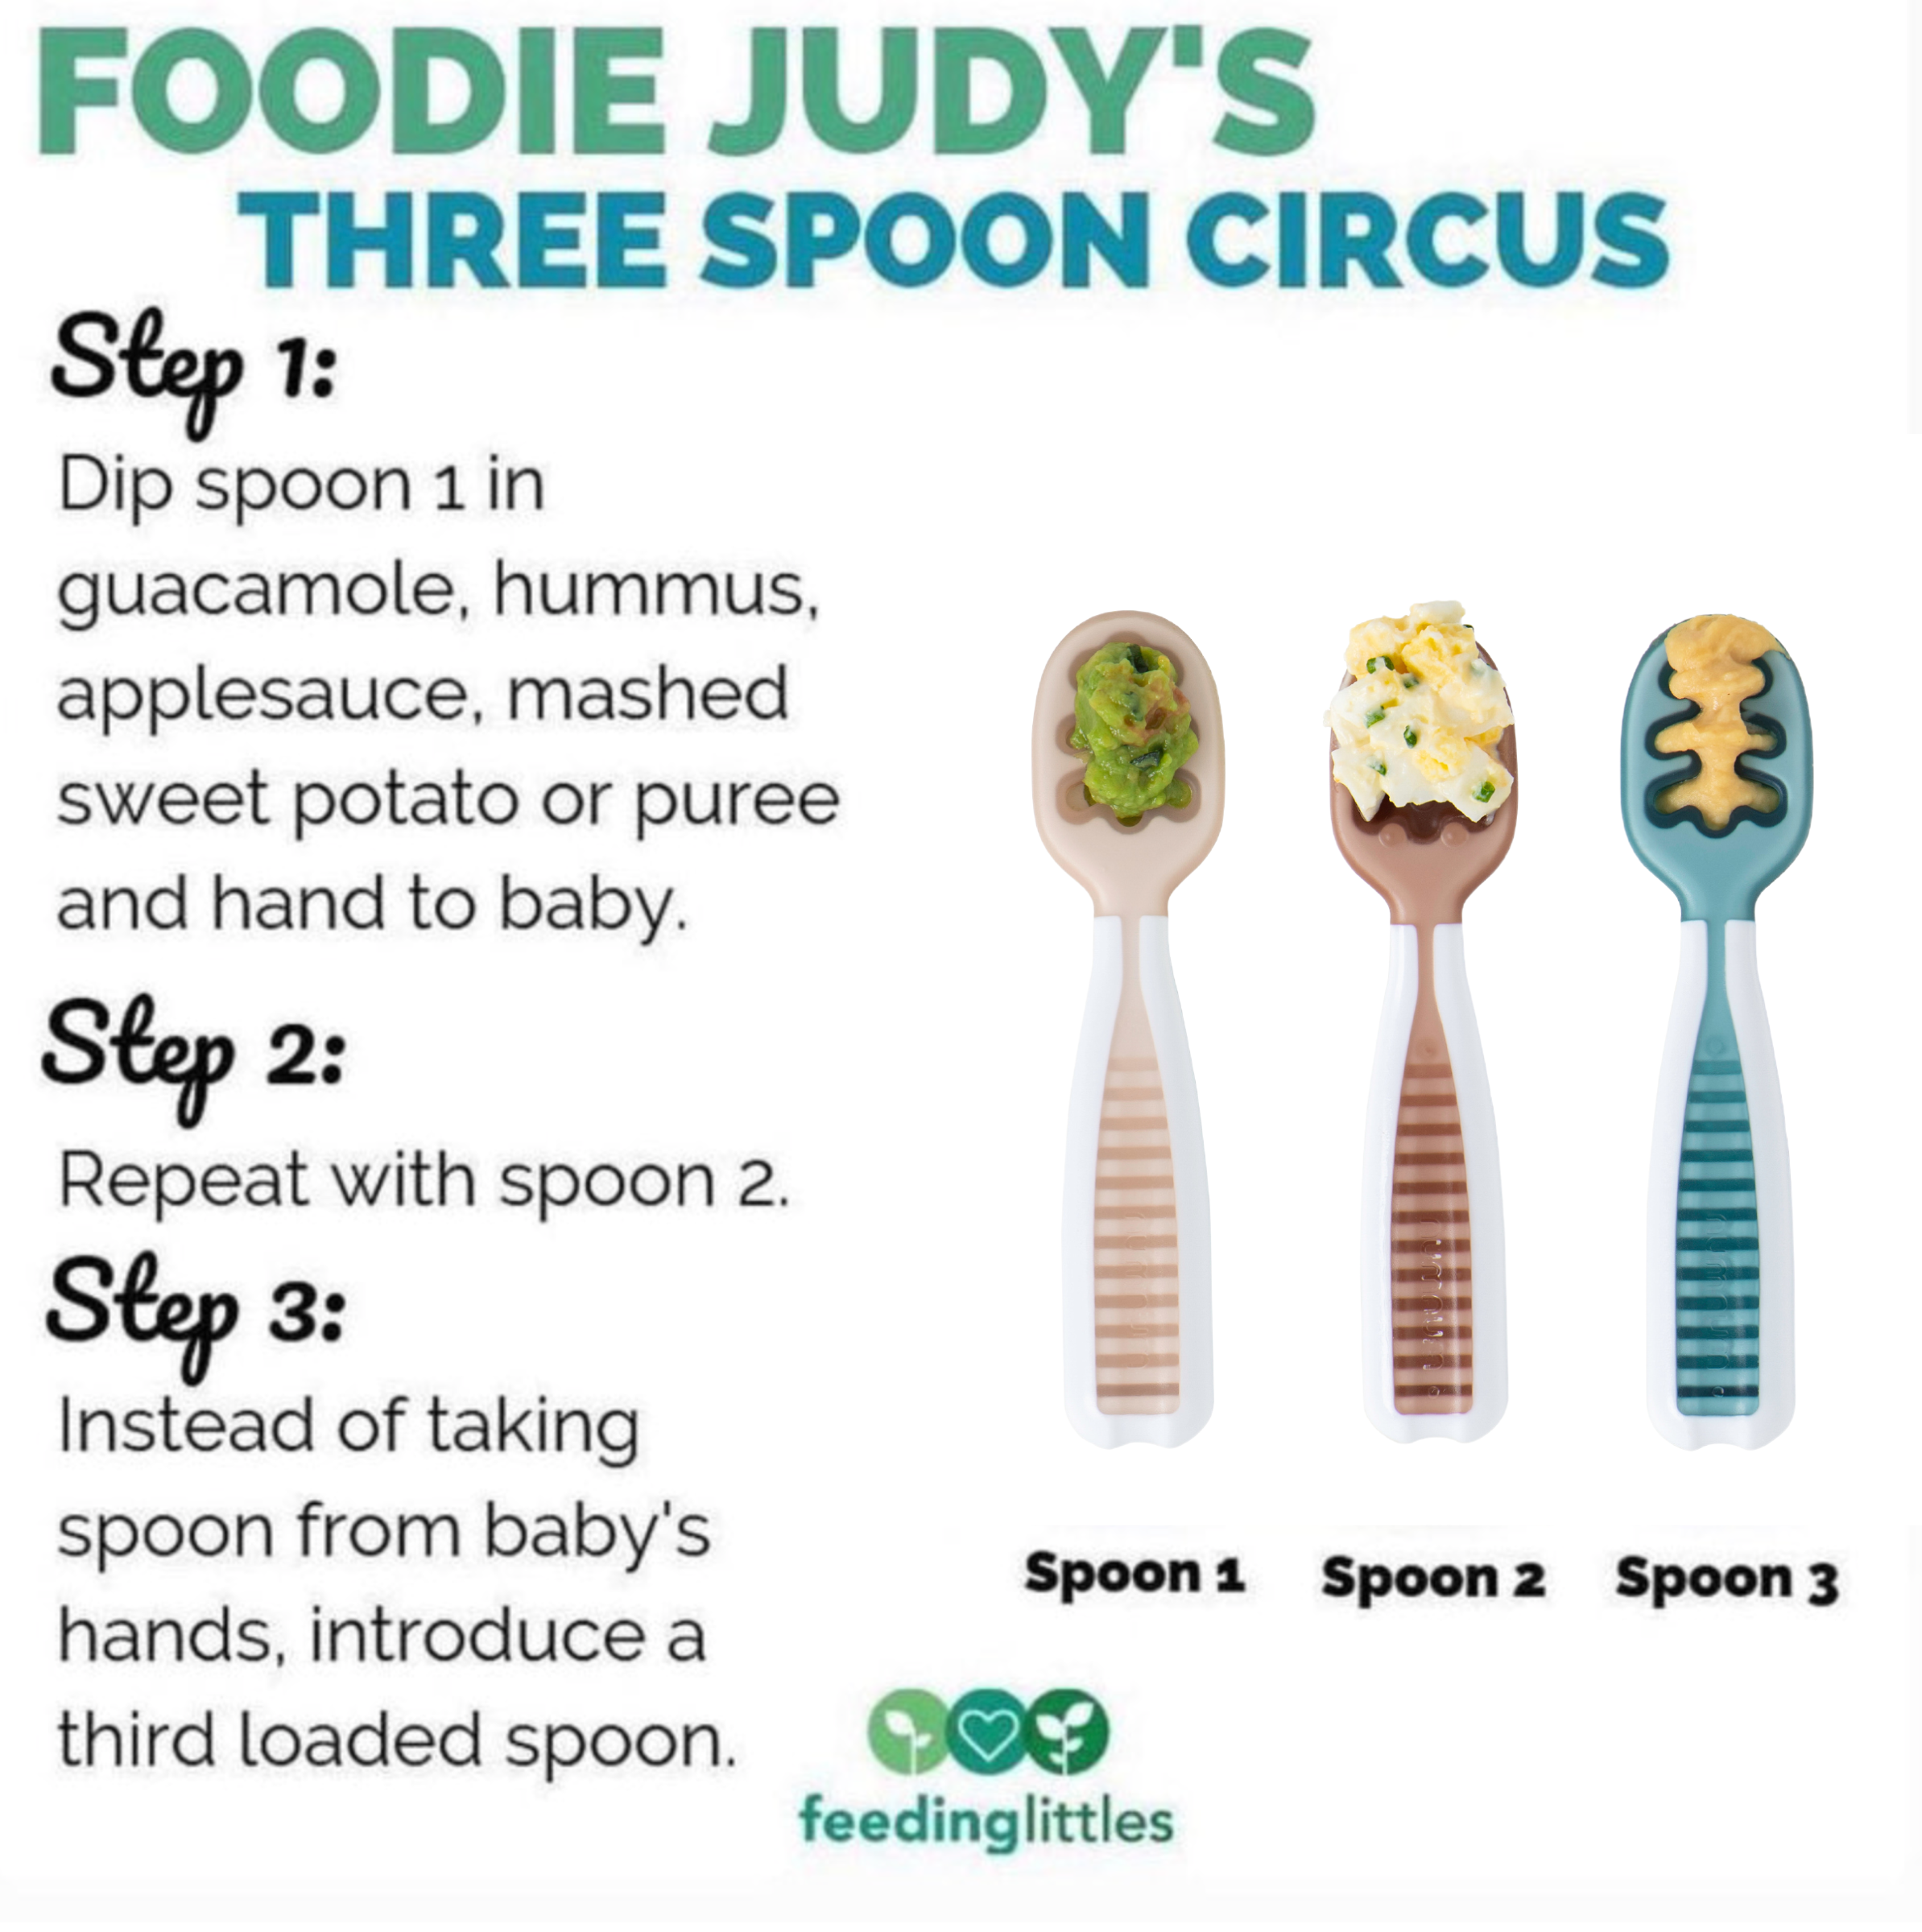 Feeding Littles x NumNum GOOtensil Pre-Spoons | Baby Spoon Set (STAGE 1 + Stage 2) | BPA Free Silicone Self Feeding Toddler Utensils | for Kids Ages